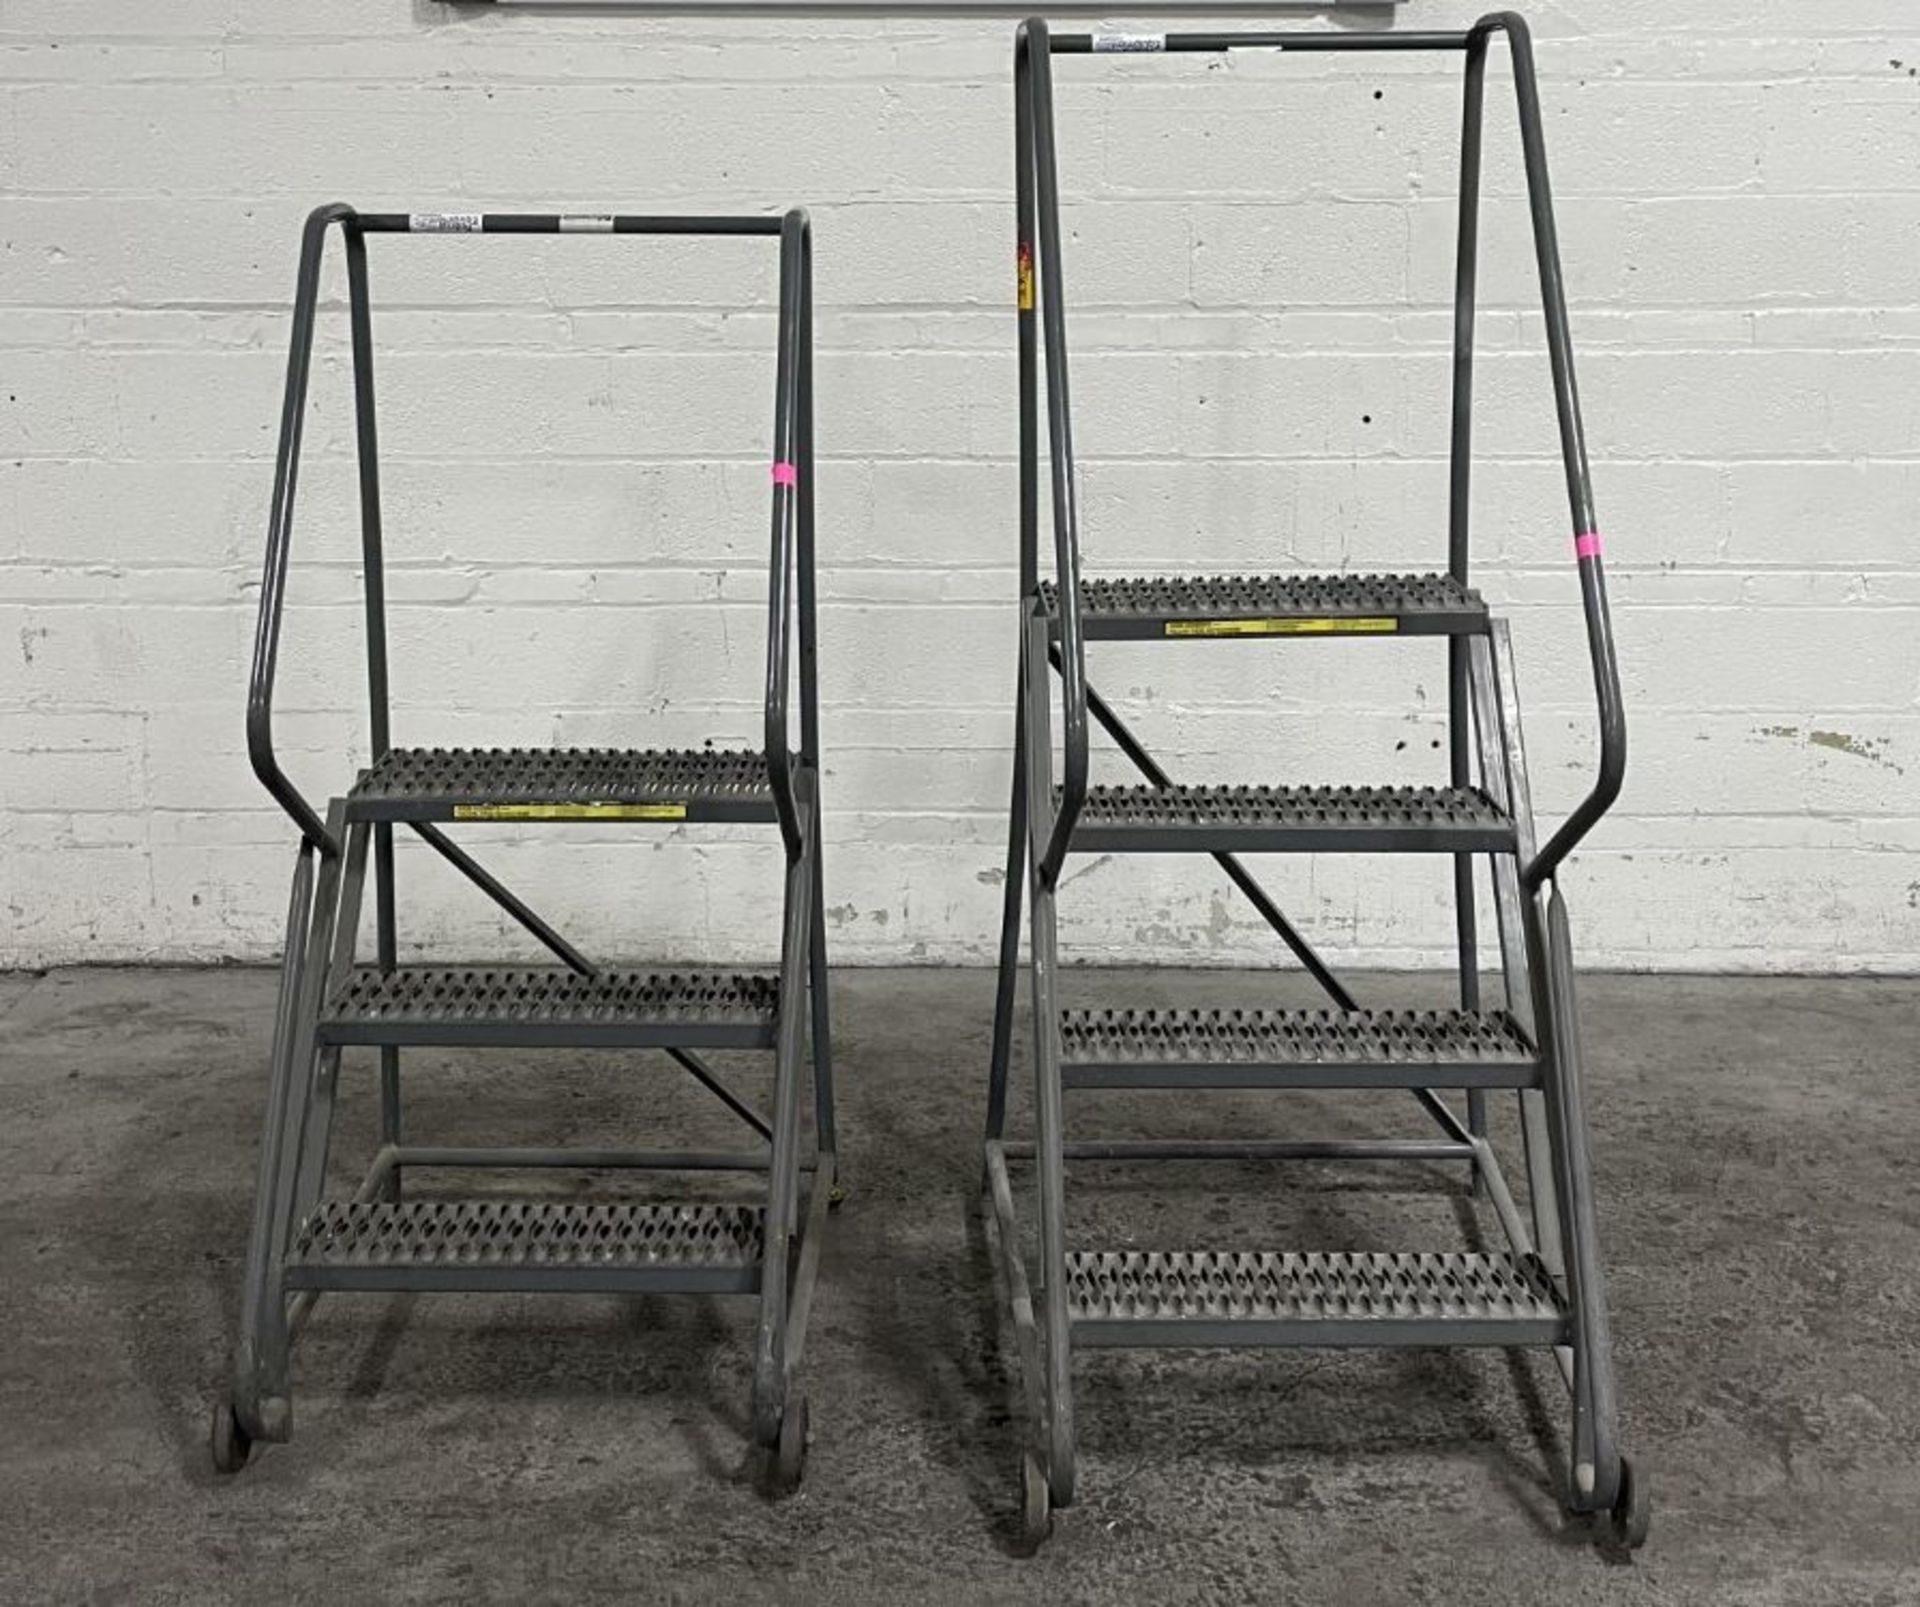 Lot of Warehouse Equipment - 2 rolling stairs